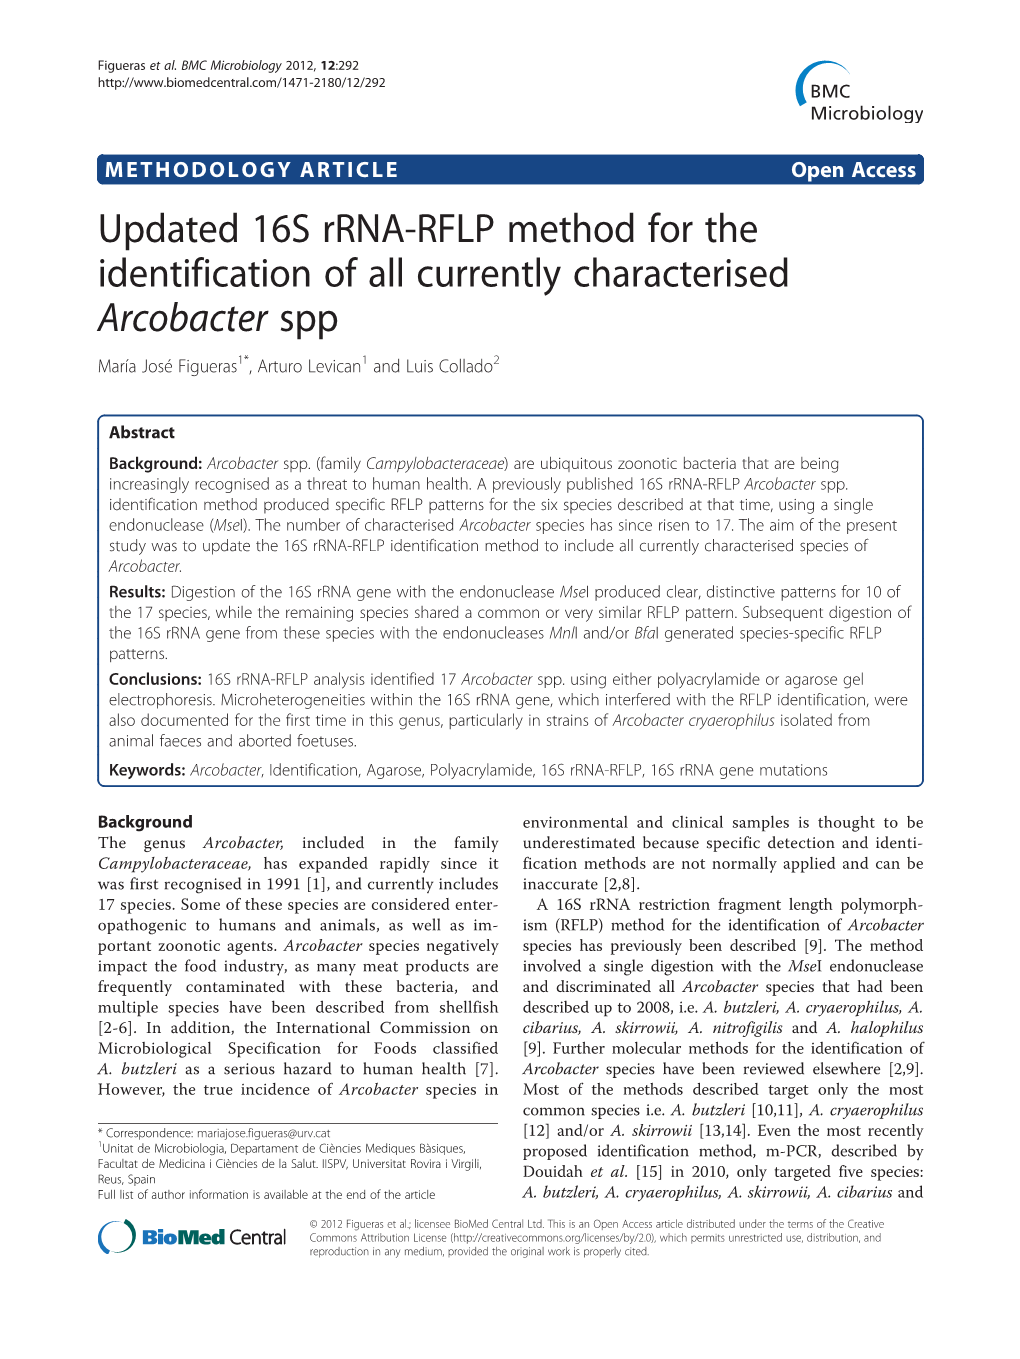 Updated 16S Rrna-RFLP Method for the Identification of All Currently Characterised Arcobacter Spp María José Figueras1*, Arturo Levican1 and Luis Collado2